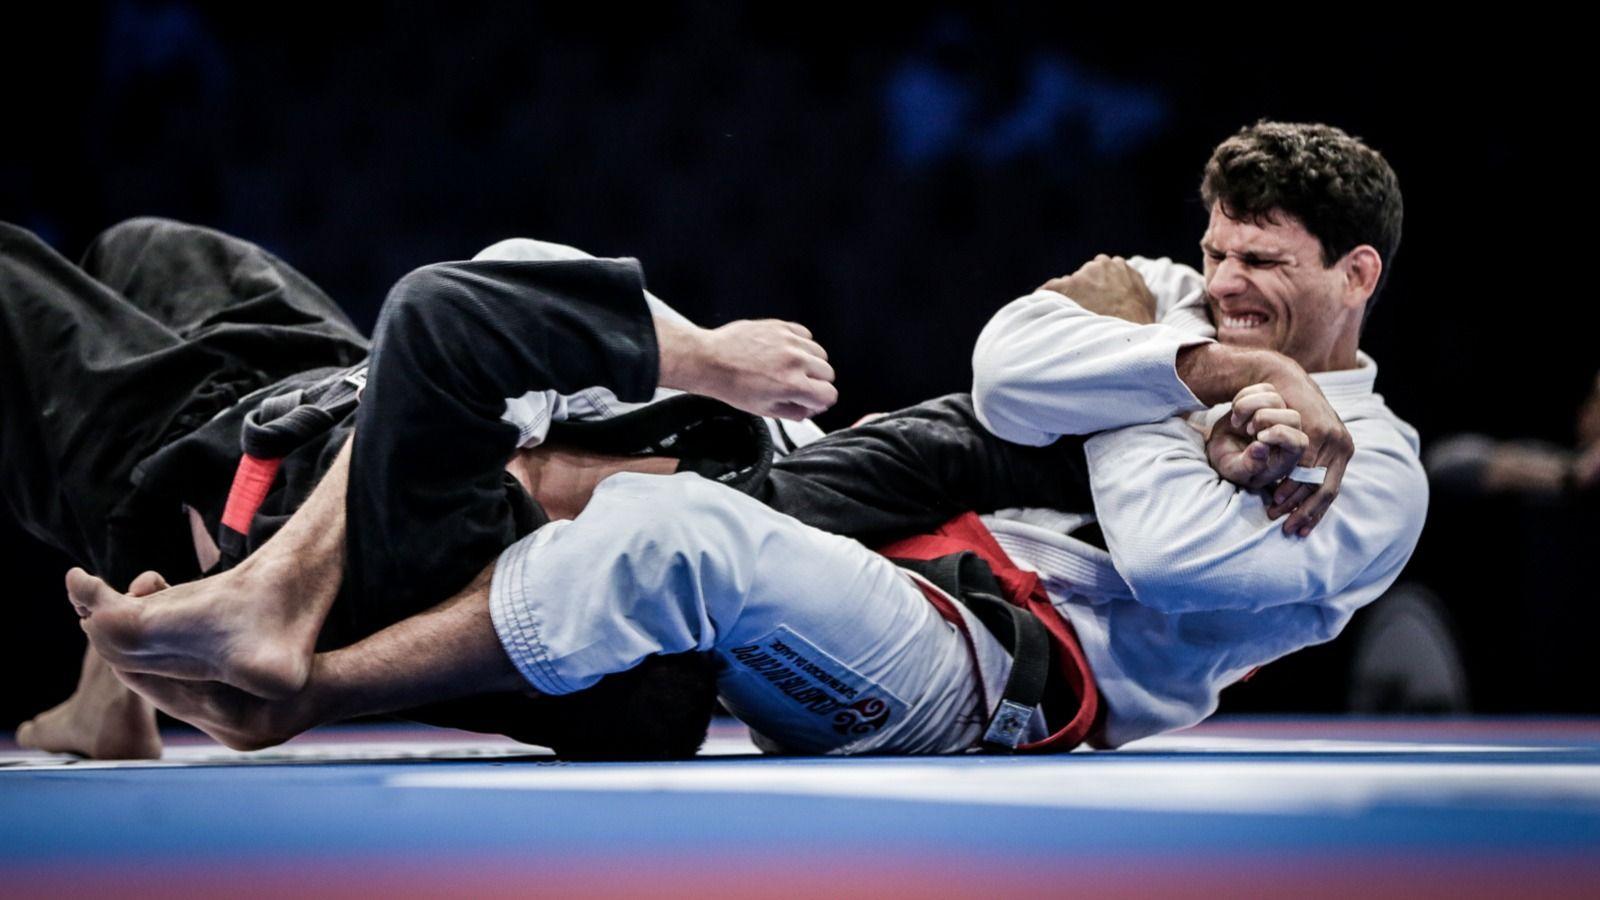 Matches We Want To See at UAEJJF Grand Slam Japan